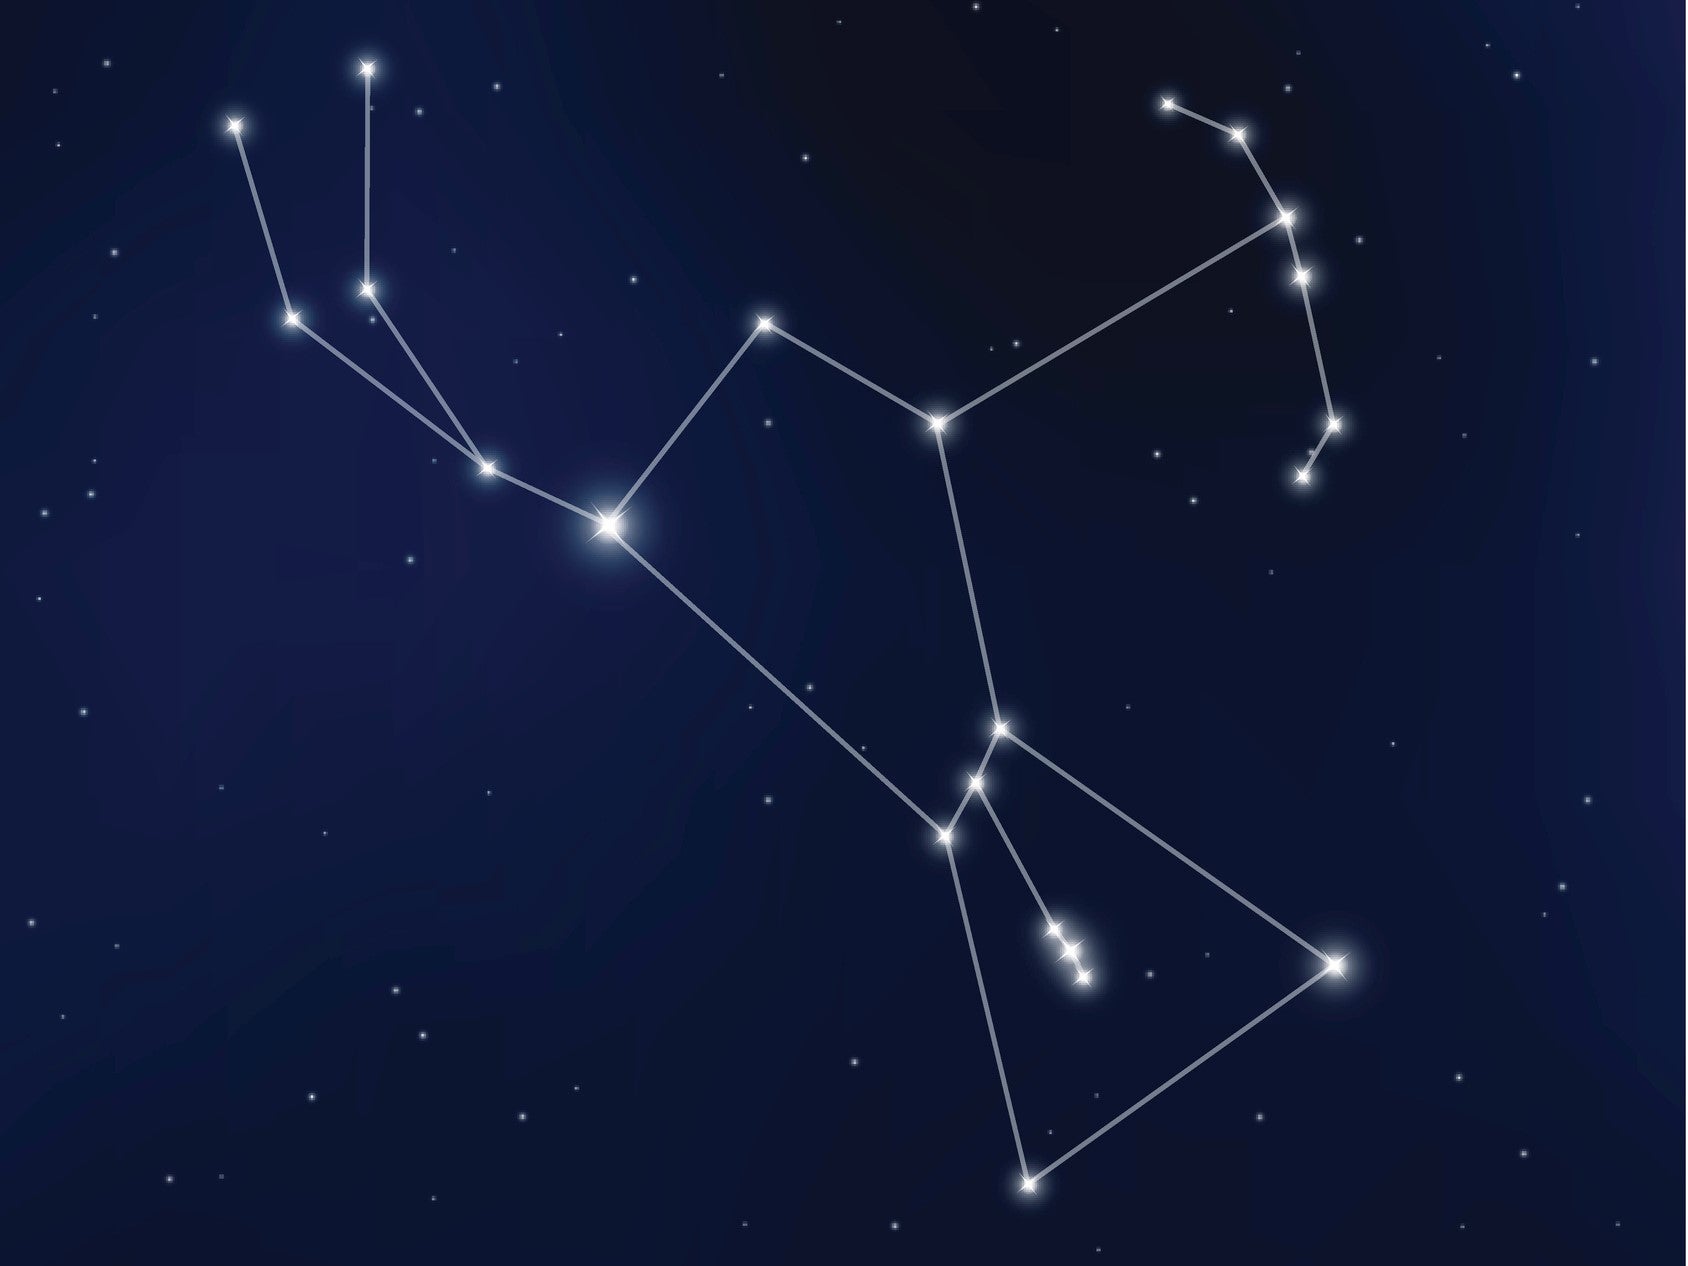 The Orion constellation is one of the most prominent star patterns in the night sky